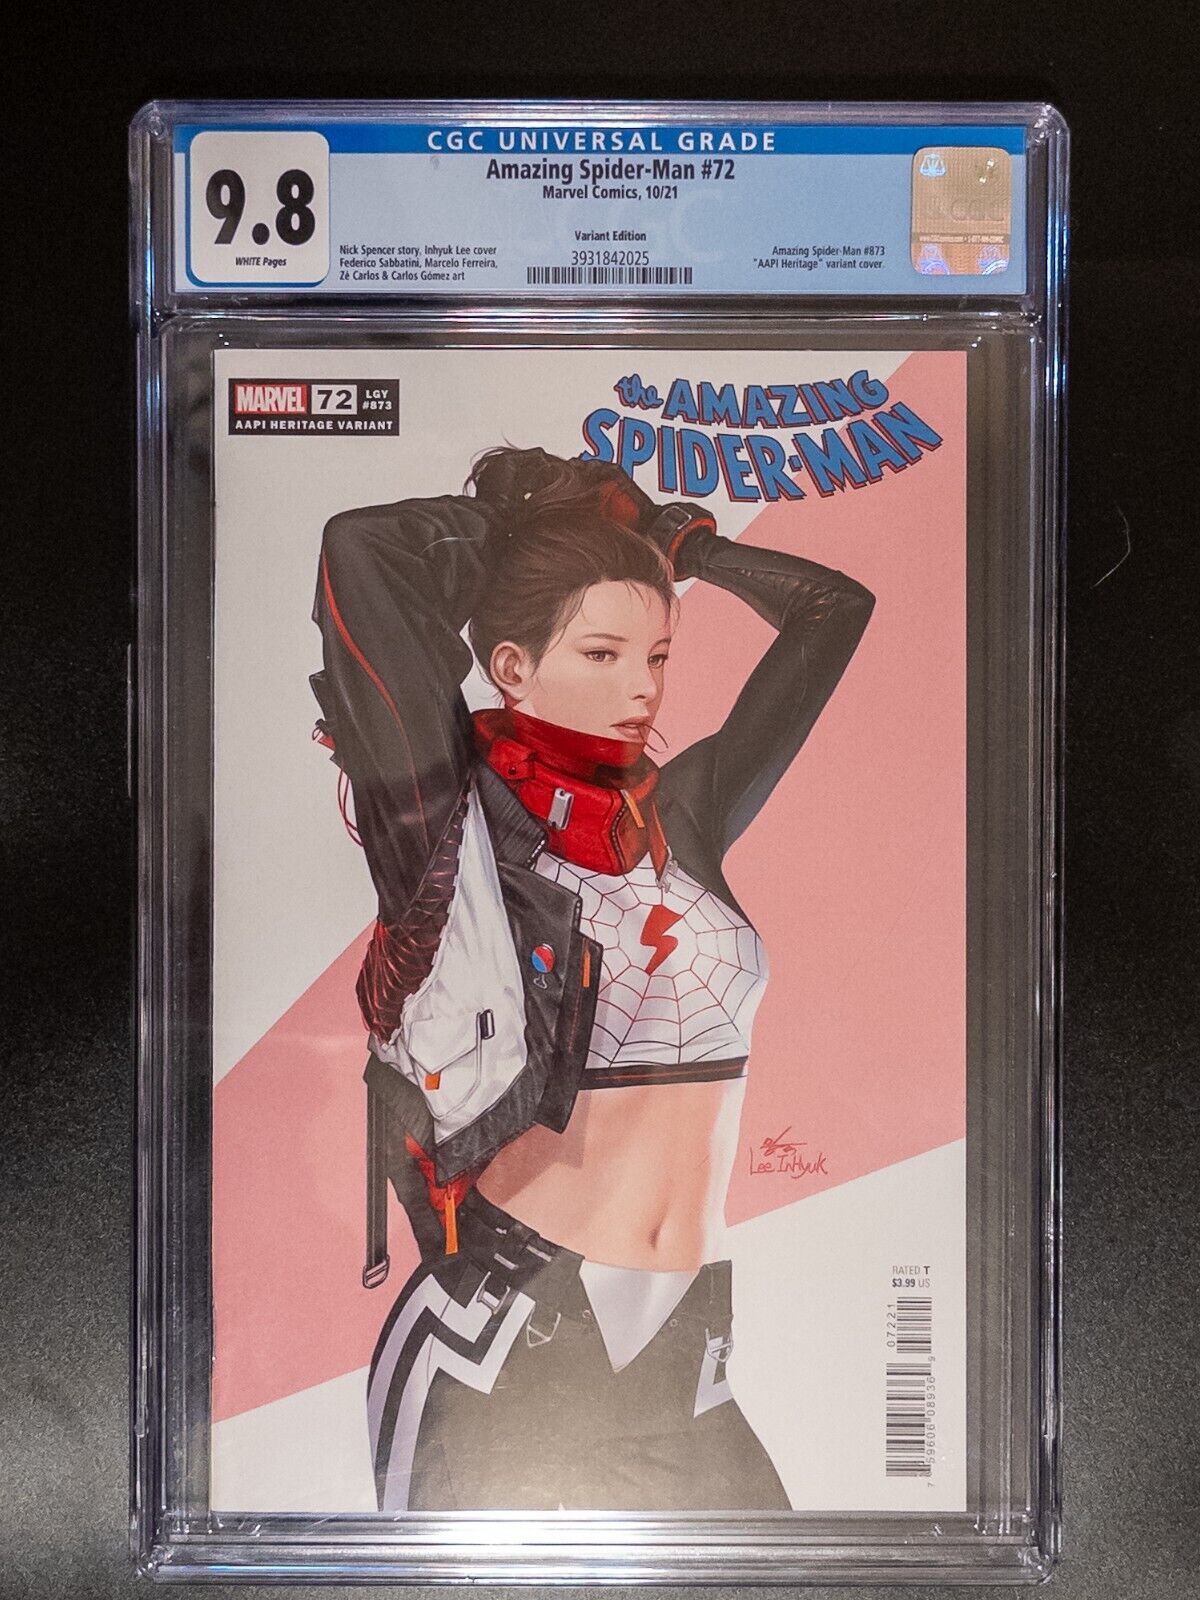 Amazing Spider-Man Issue #72 AAPI Variant Cover CGC Graded 9.8 Comic Book